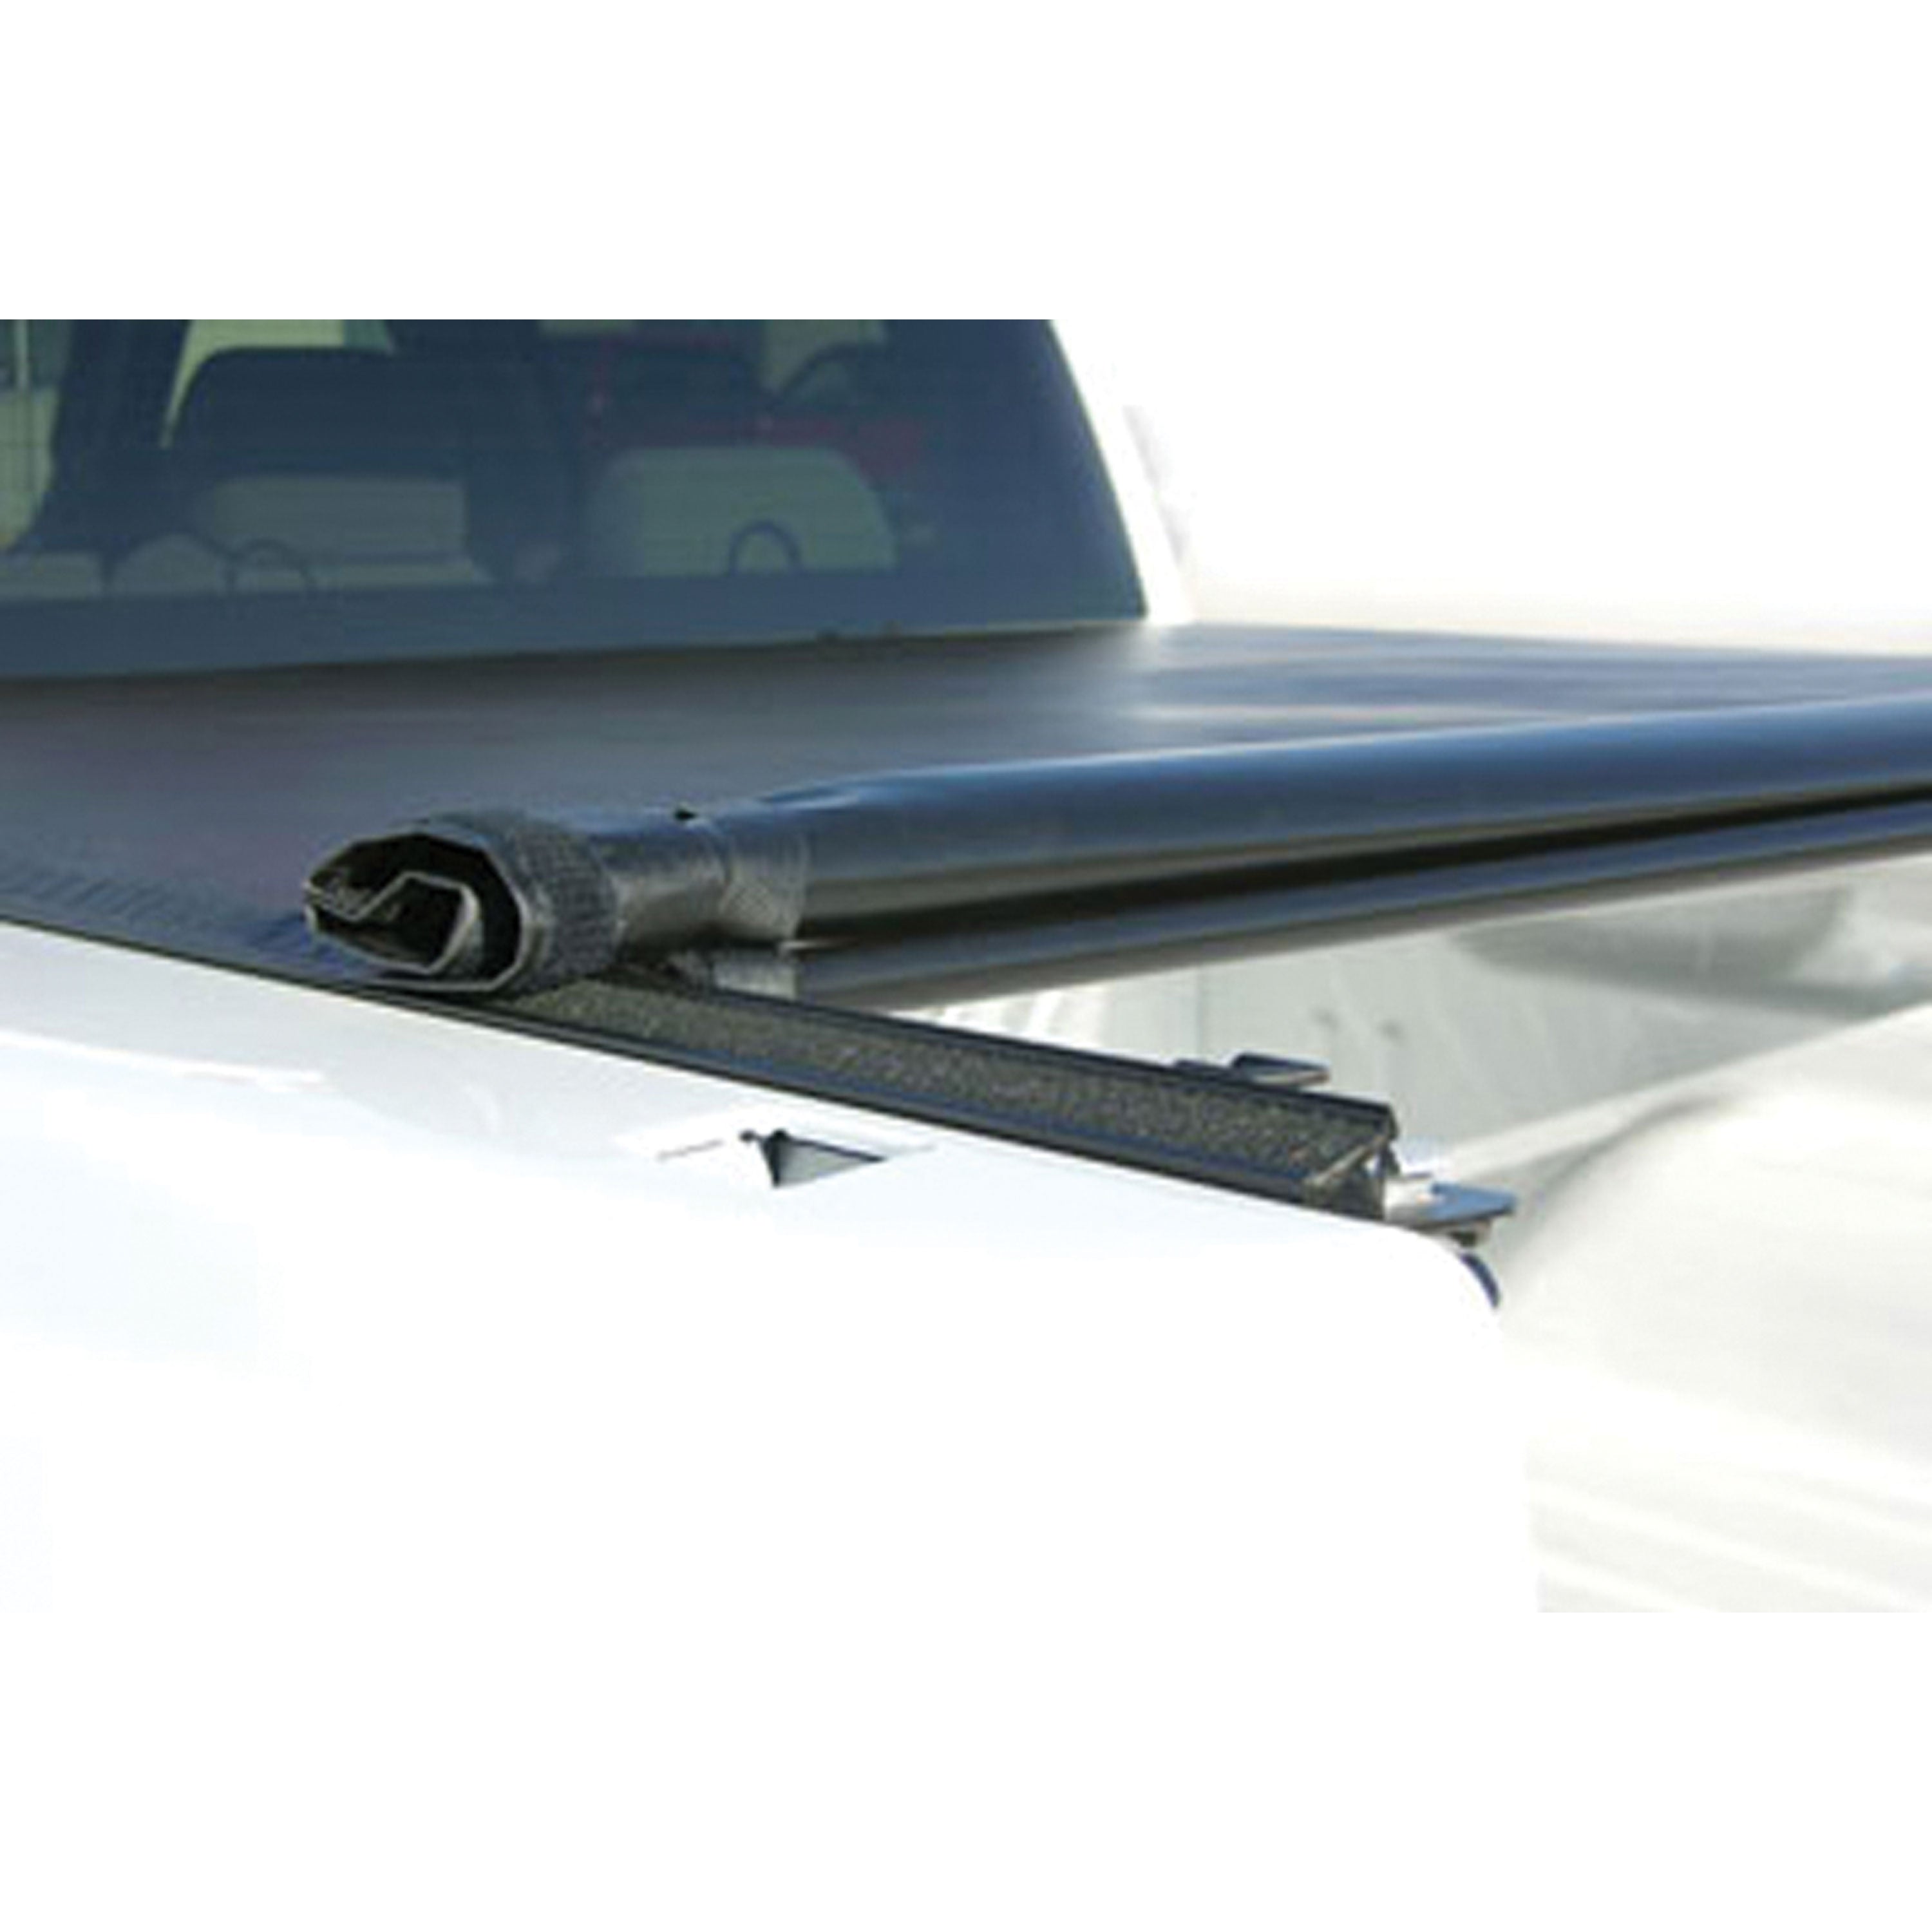 Agri-Cover 11279 Access Tonneau Cover for '04+ F-150 Super Cab with 6'5" Box